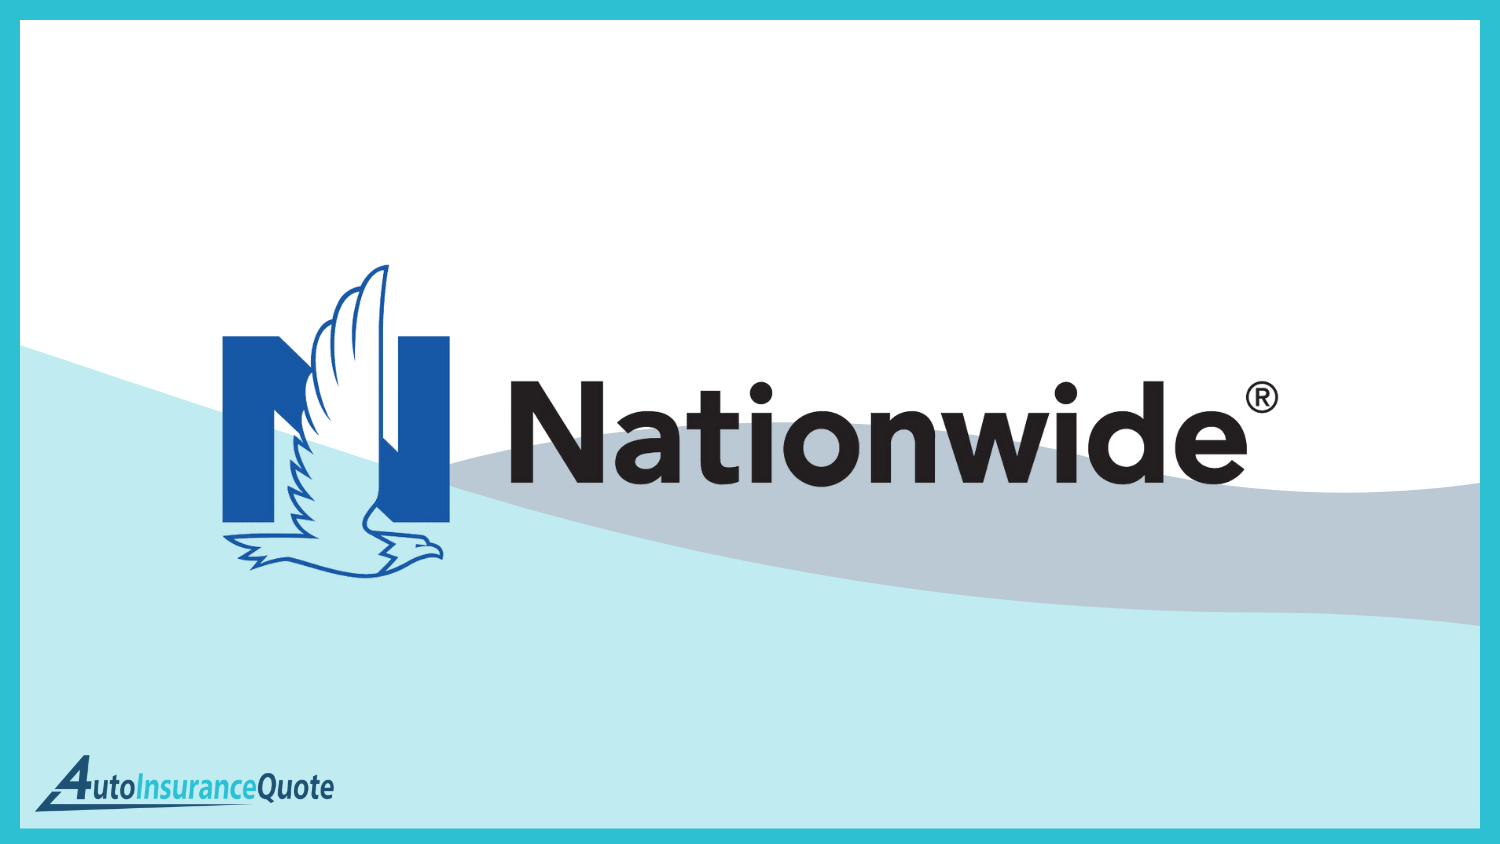 Nationwide: Best Temporary Auto Insurance